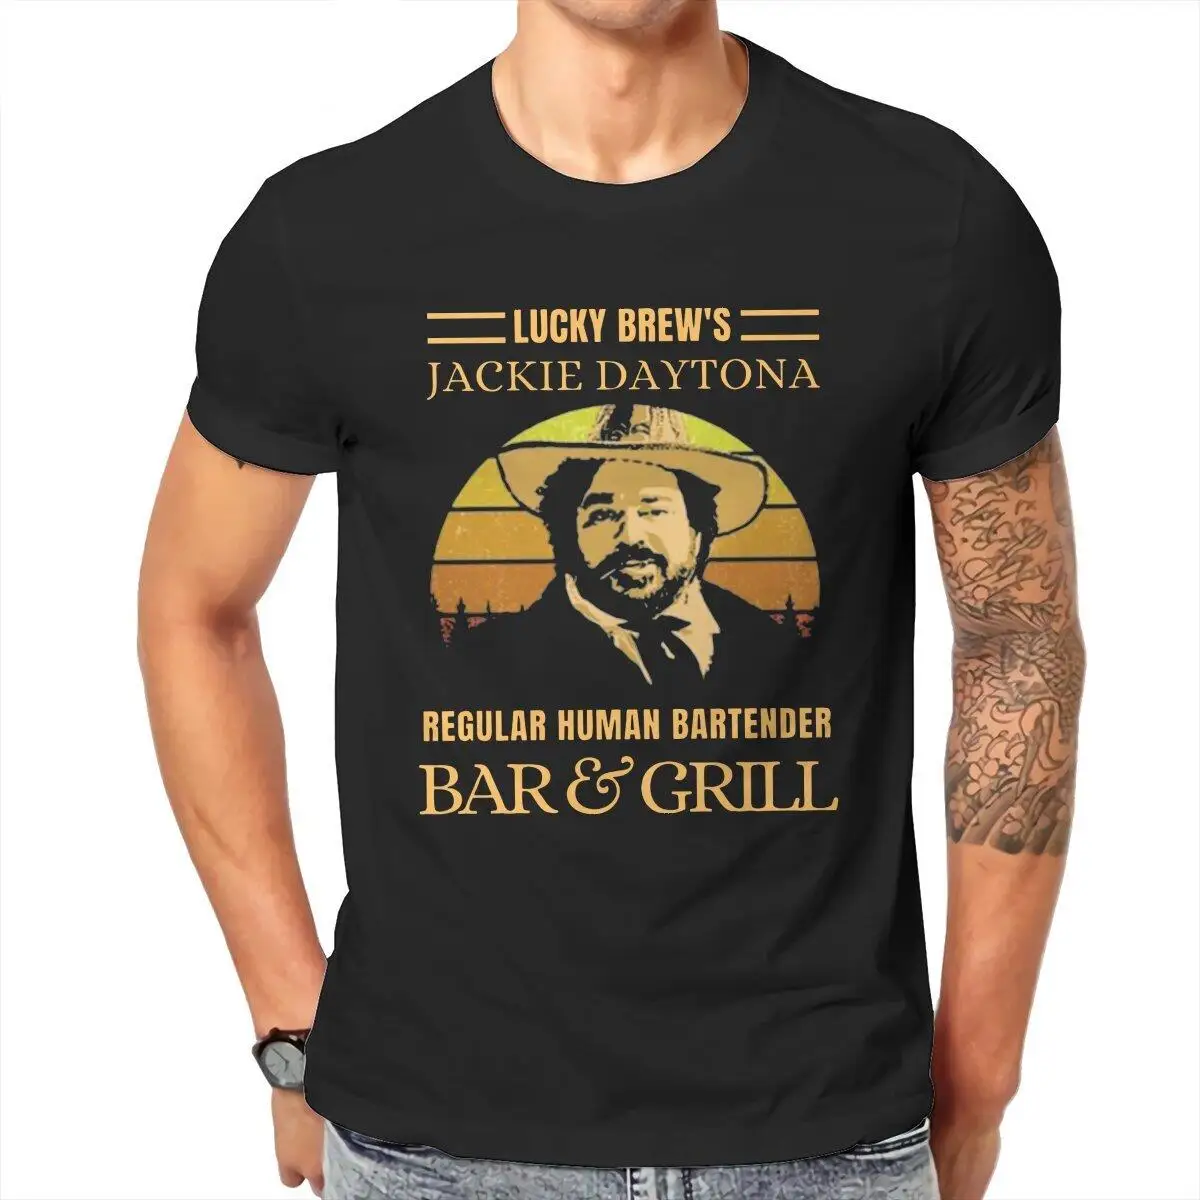 Lucky Brew's Jackie Daytona Bartender T-Shirts Men What We Do in the Shadows Cotton Tee Shirt Crewneck T Shirts Plus Size Tops